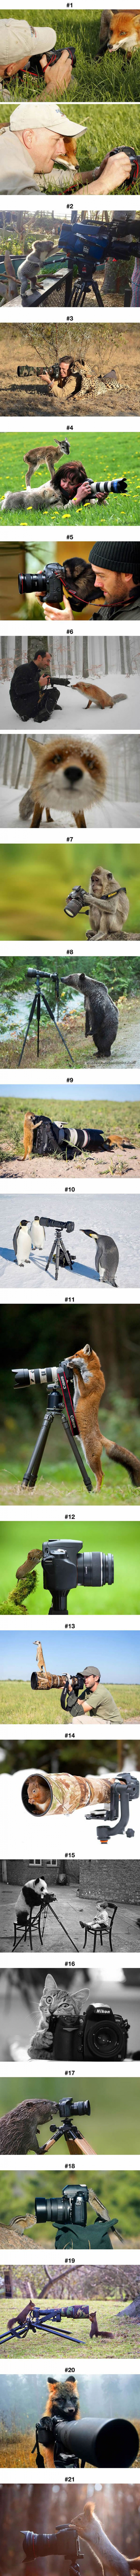 Animals That Want to Be Photographers